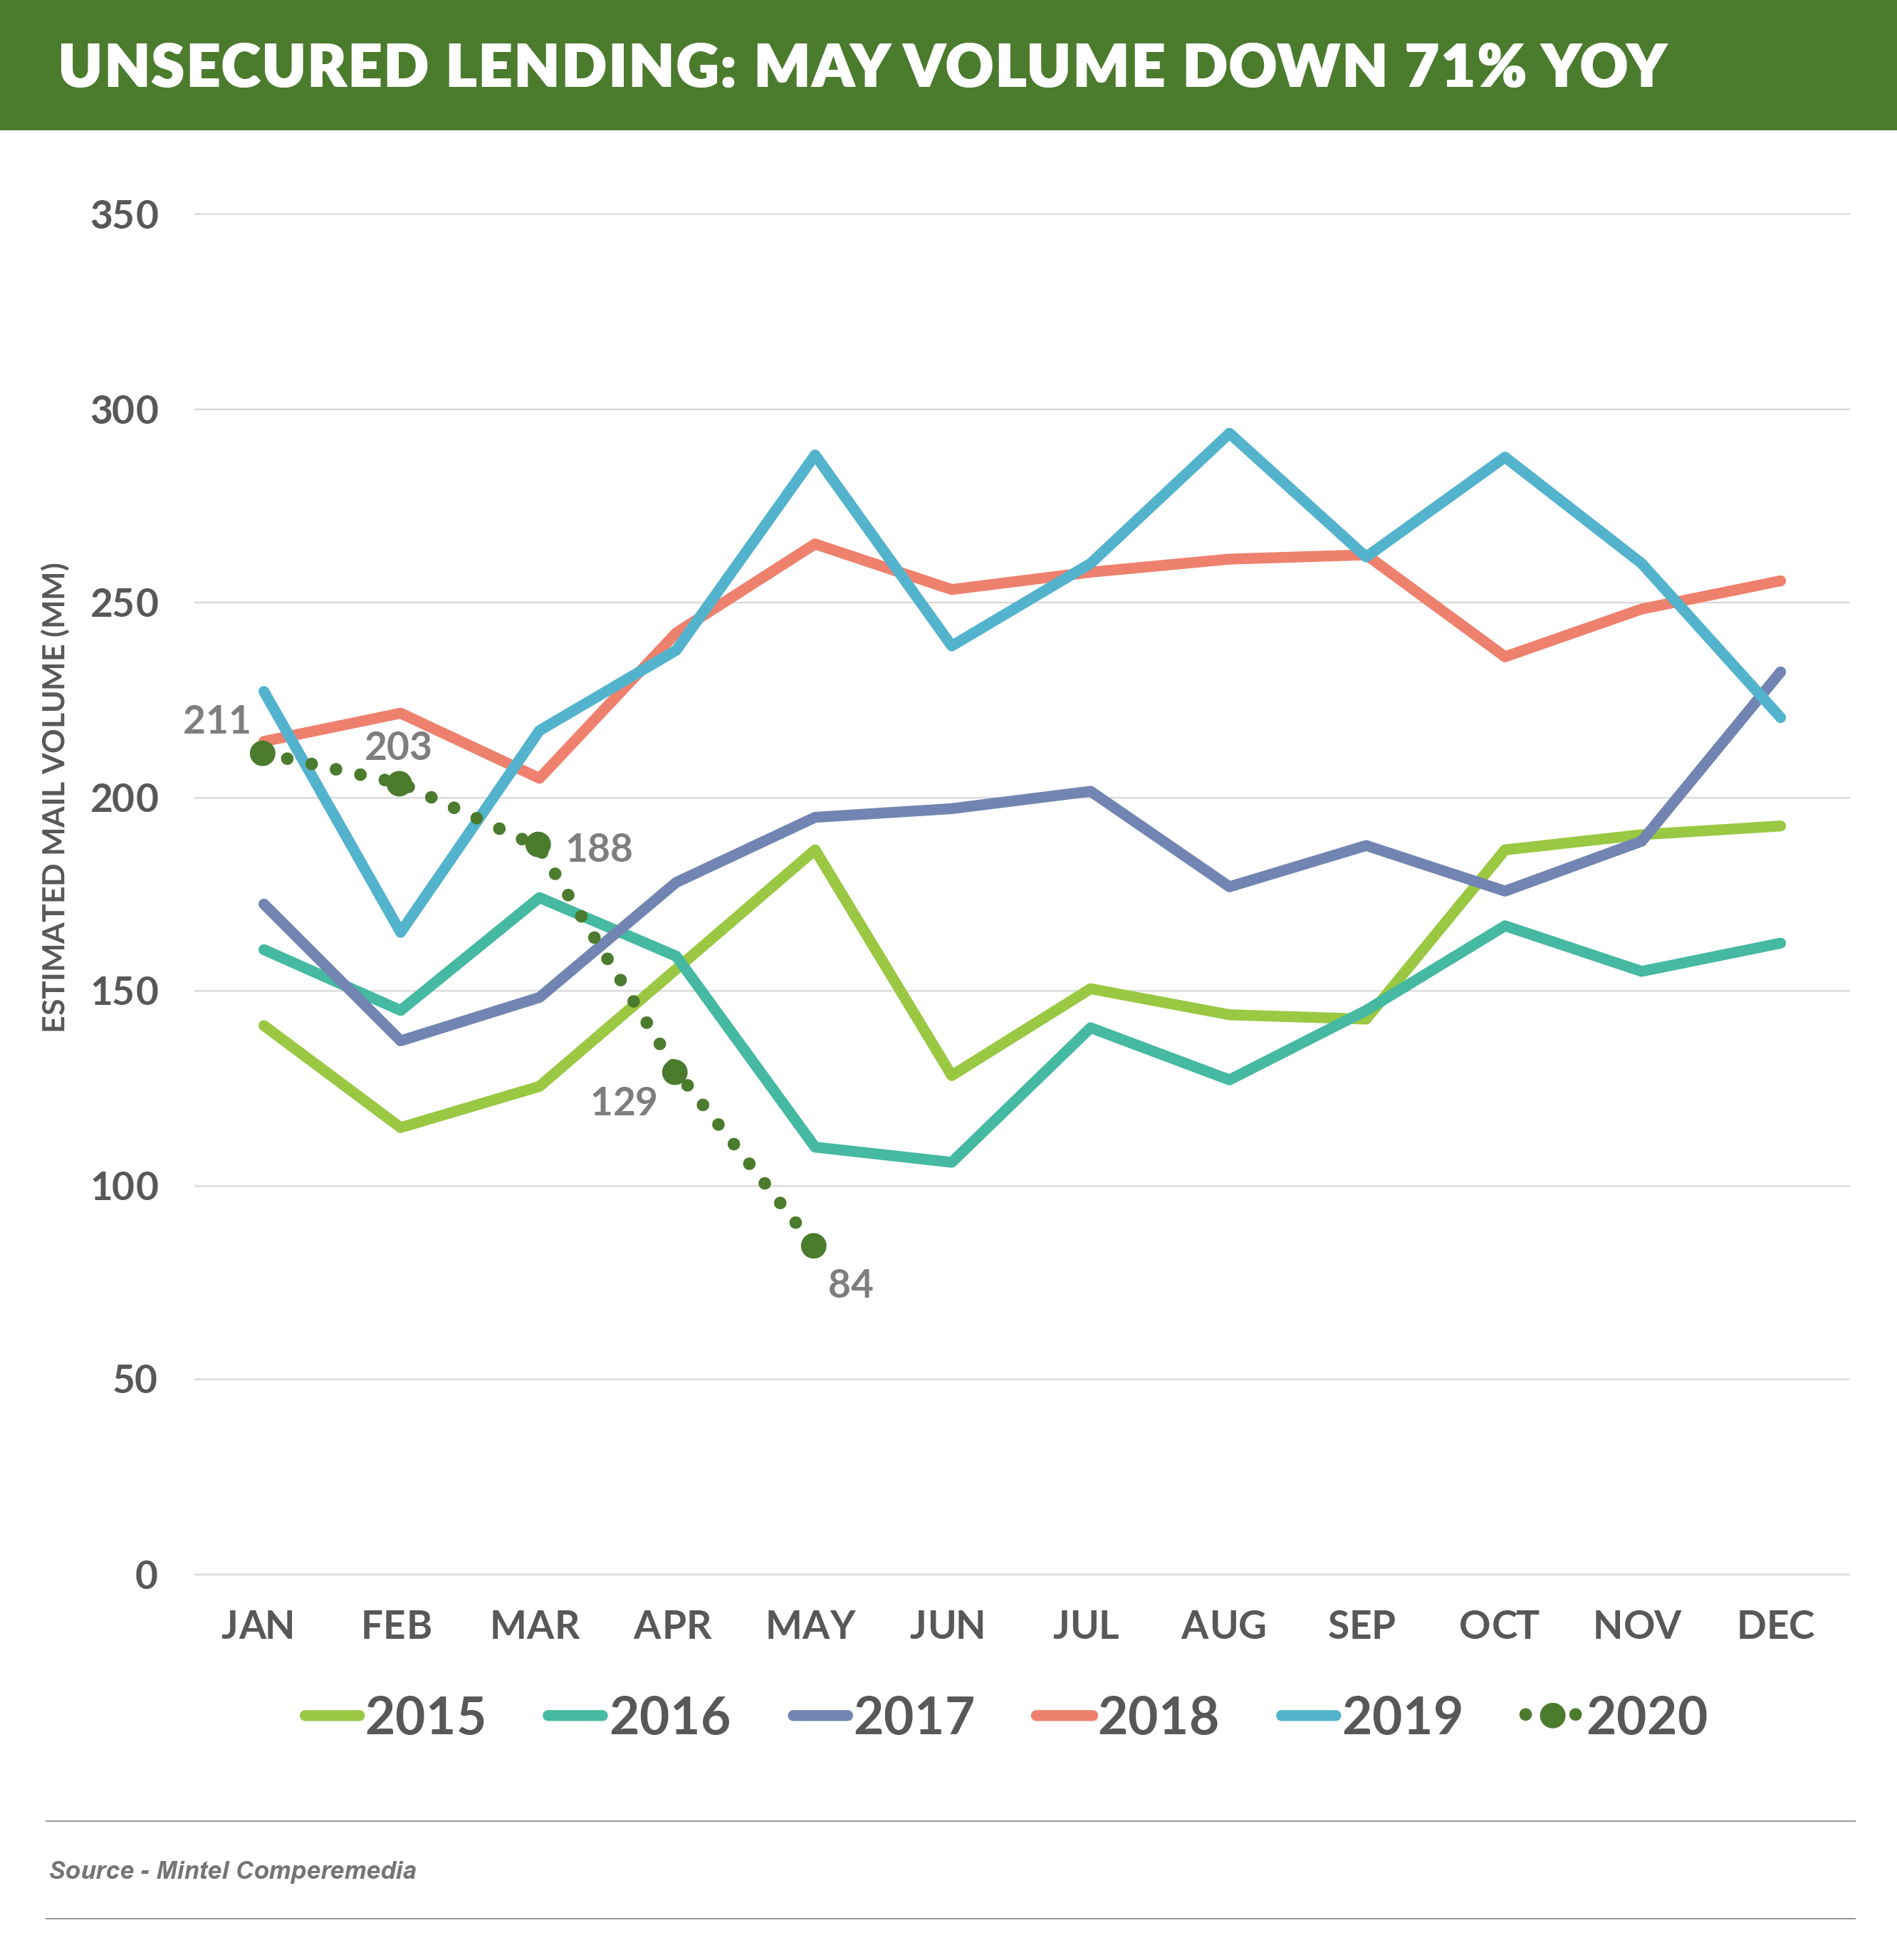 MAY VOLUME DOWN 71% YEAR OVER YEAR